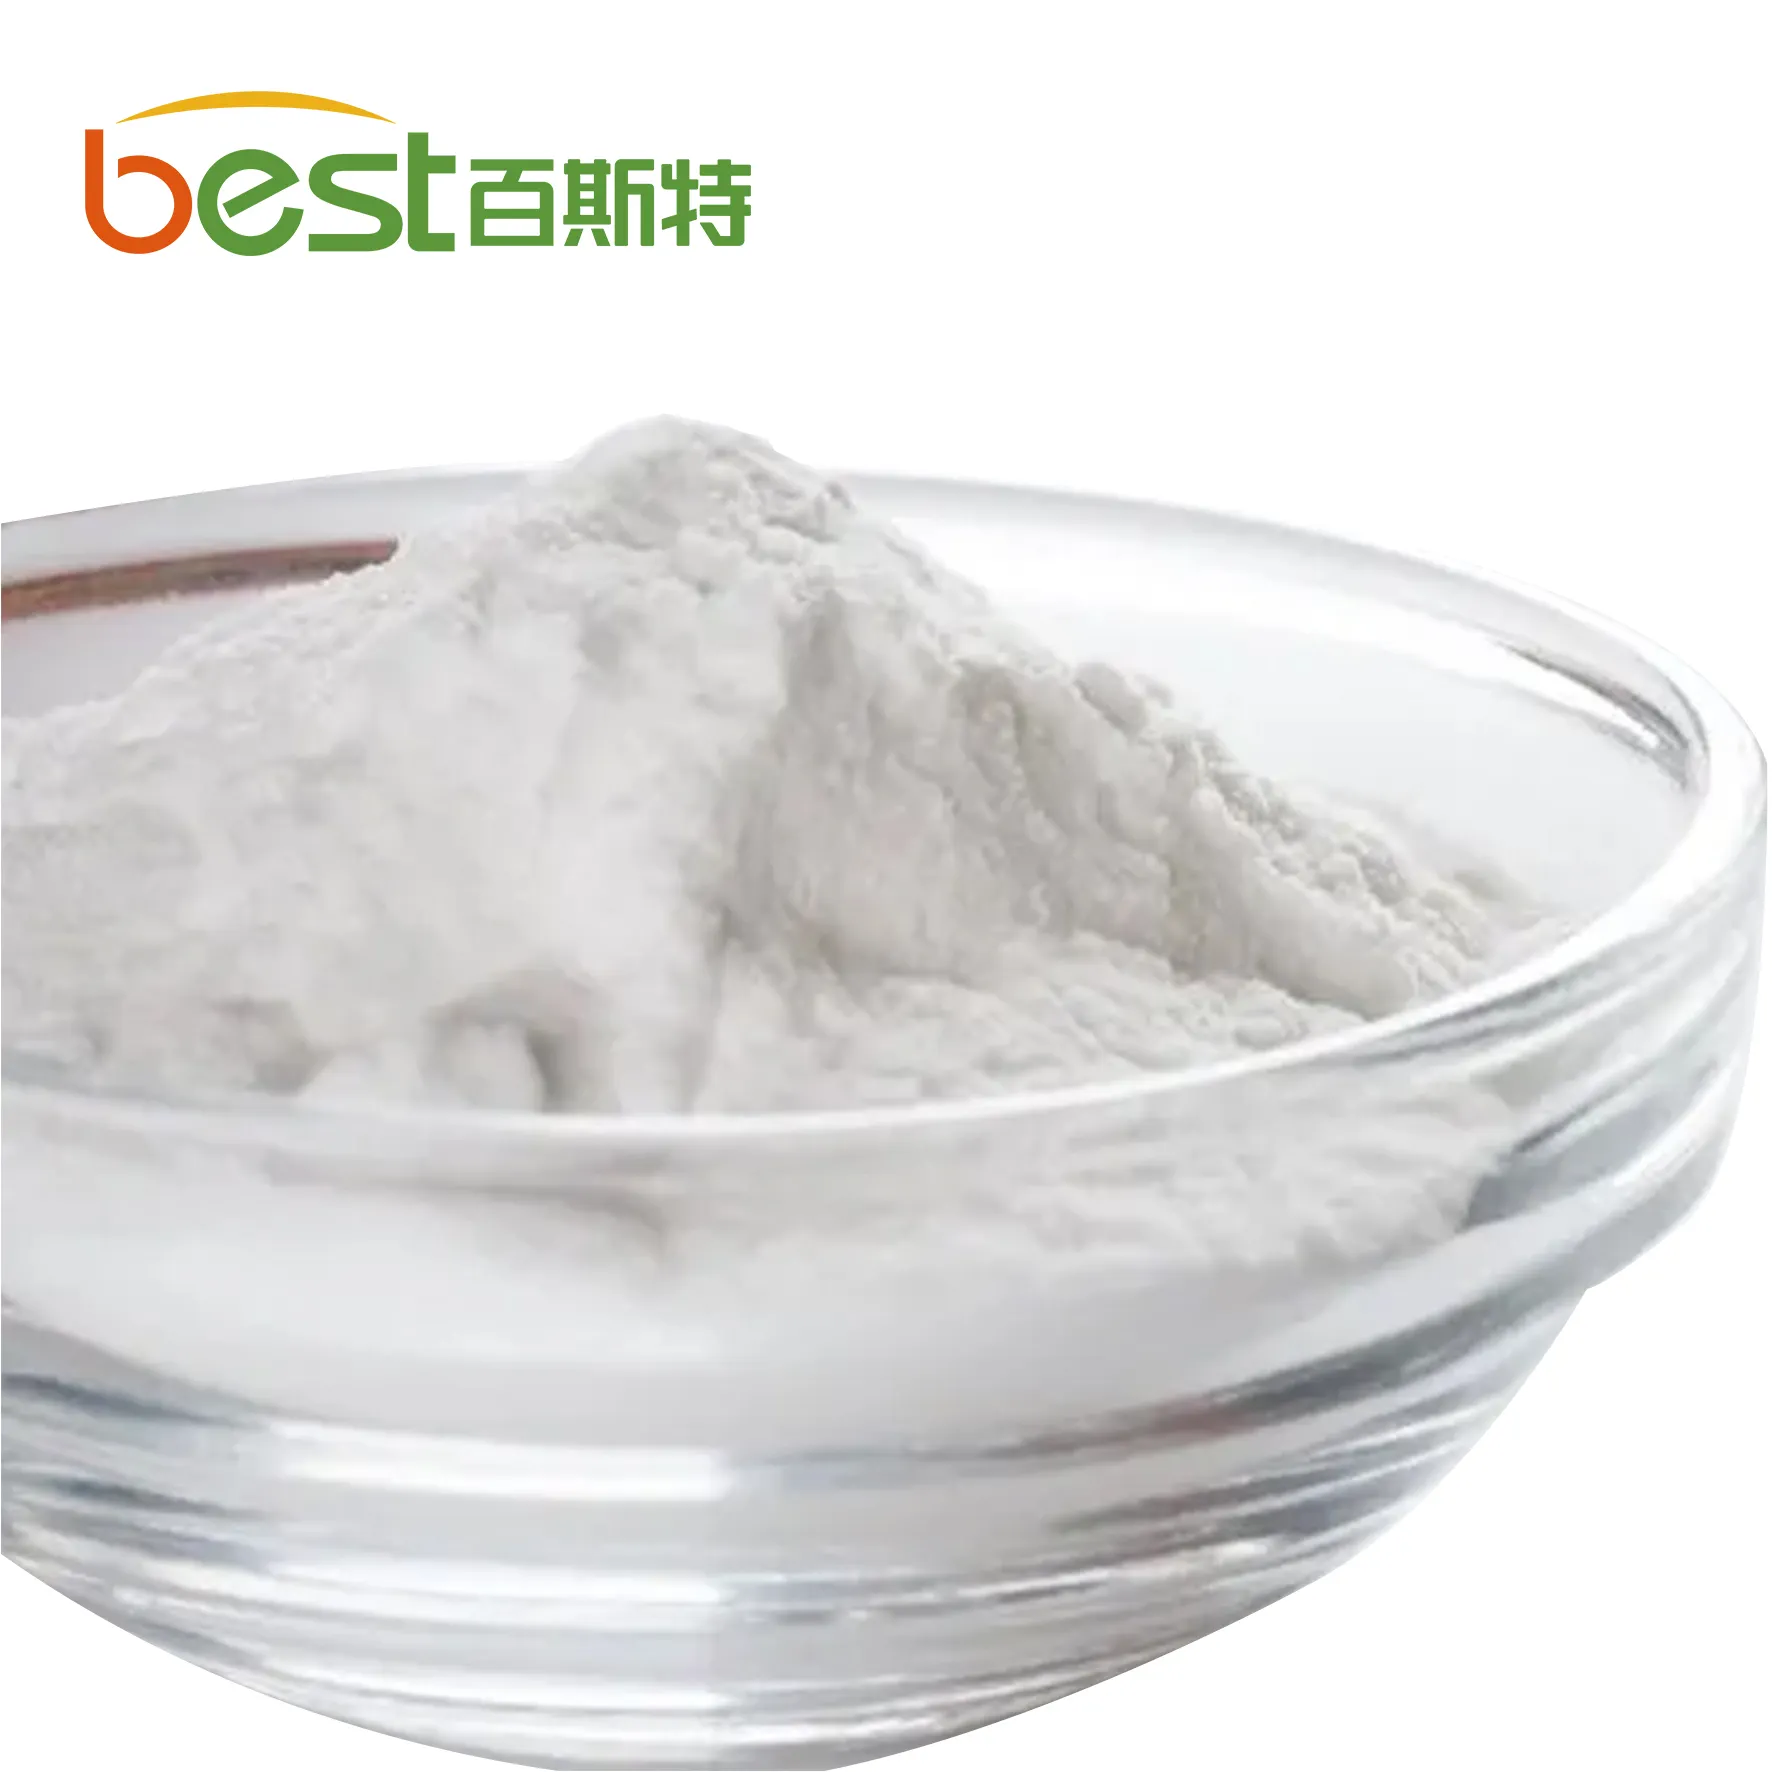 3A 4A 5A 13X Molecular Sieve Powder For Epoxy Paints Resin Zeolite Powder As Moisture Adsorbent For Polyether Polyol